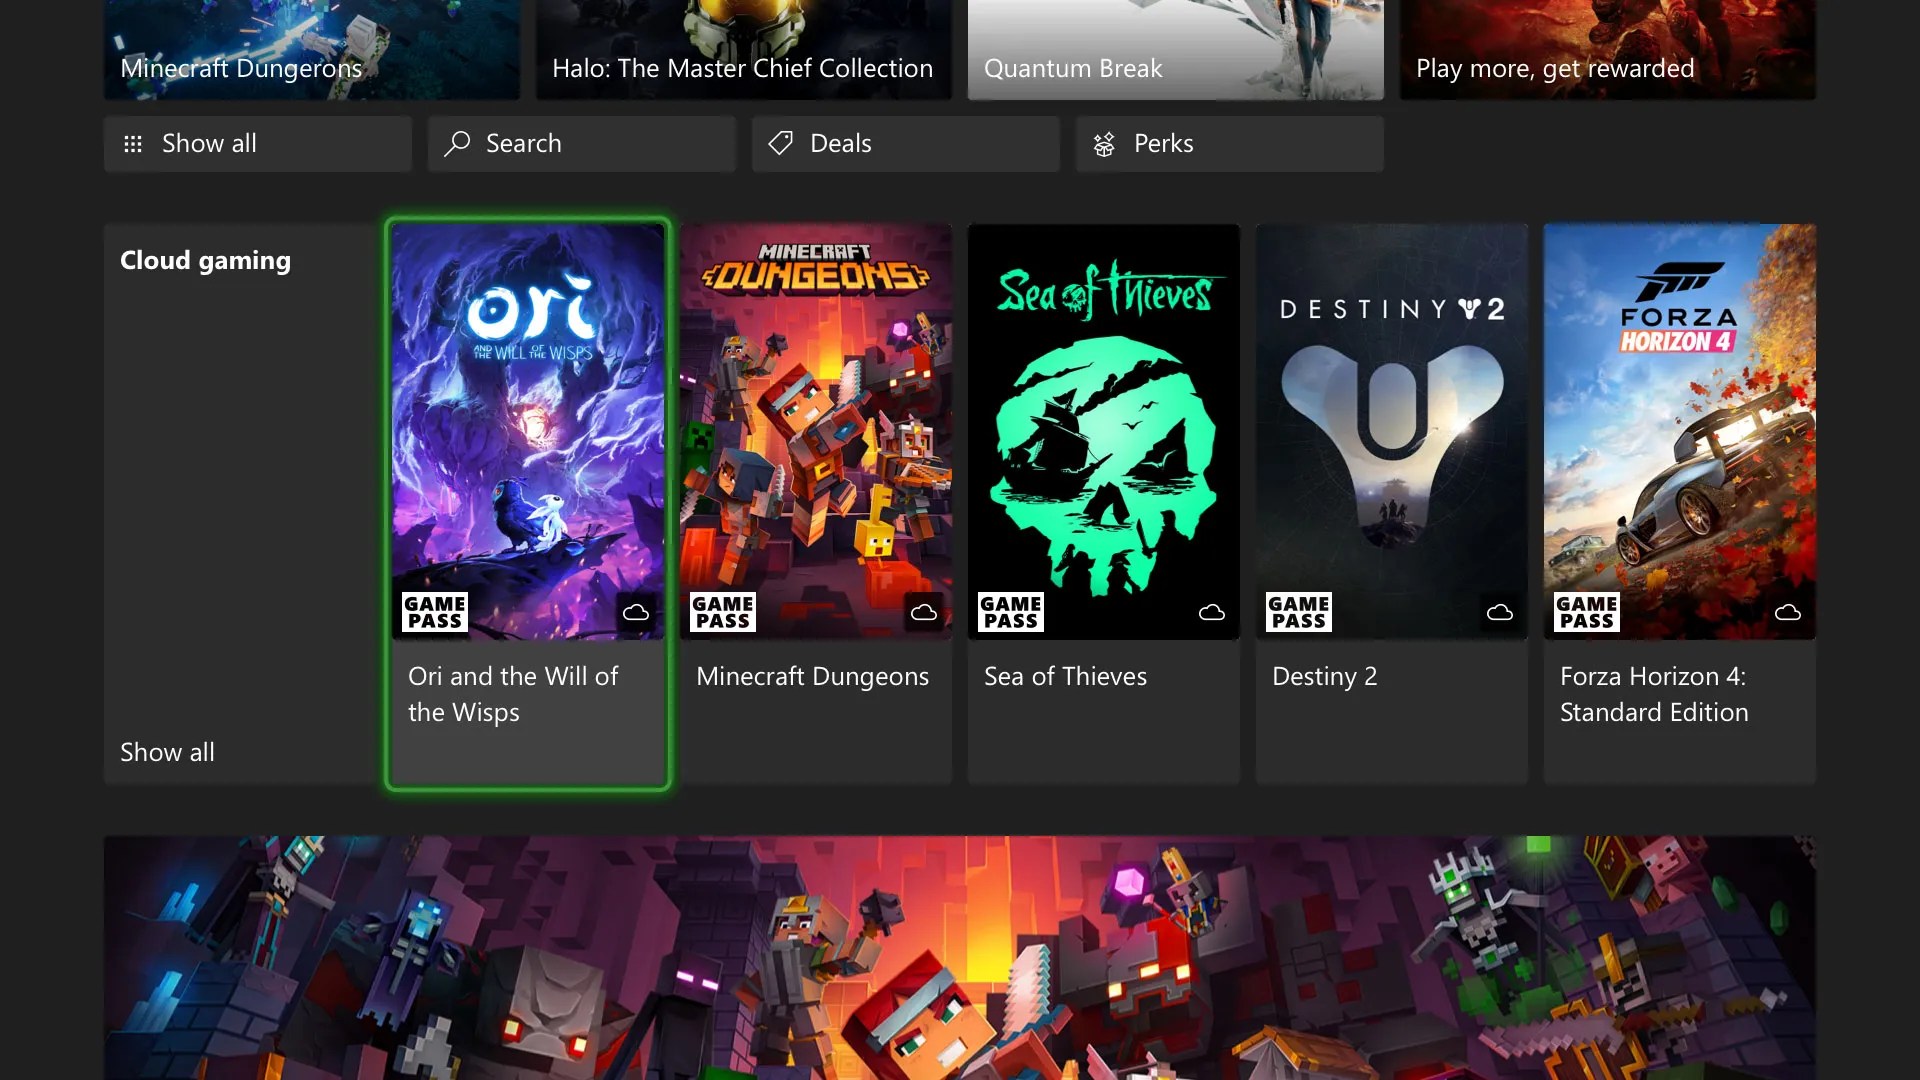 Xbox Game Pass Is KILLING Games?! Well 